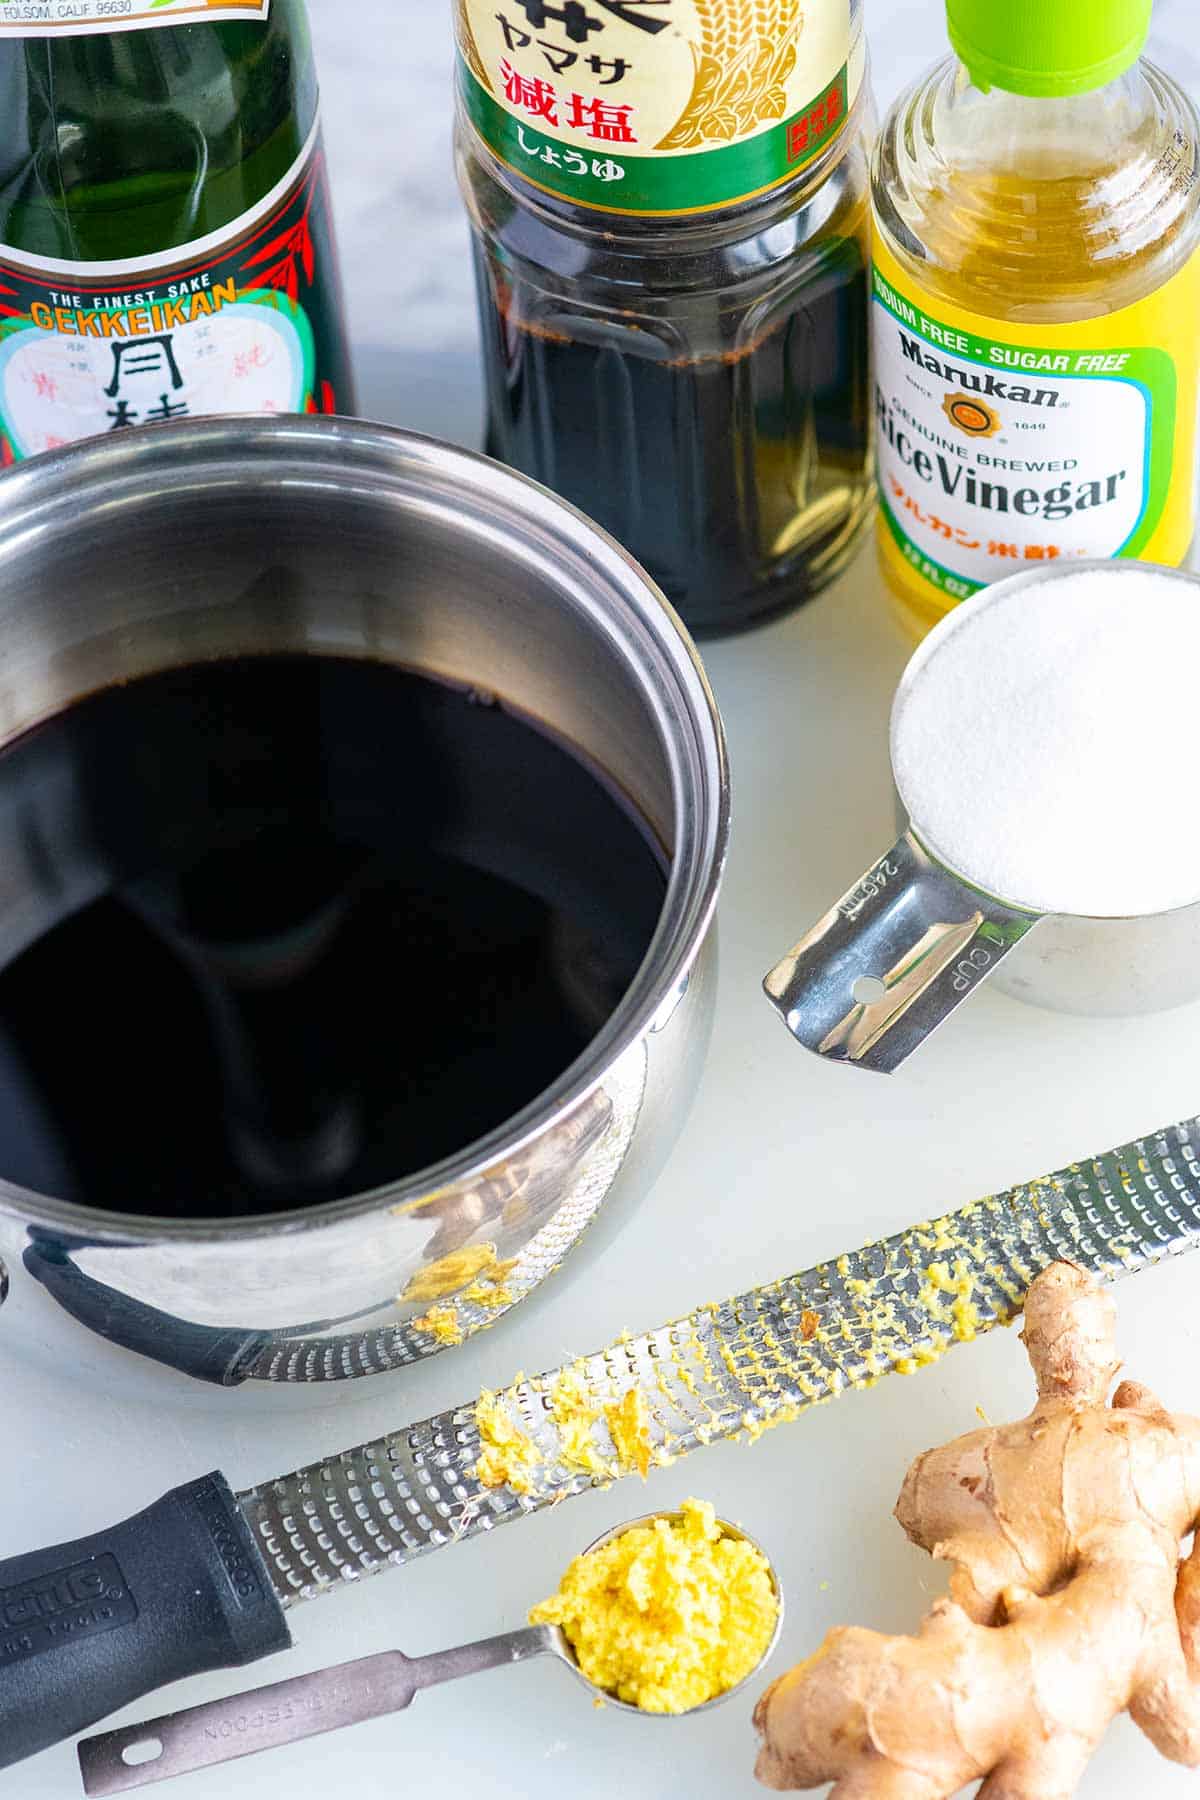 How To Make Teriyaki Sauce And Marinade From Scratch,High Efficiency Washer Detergent